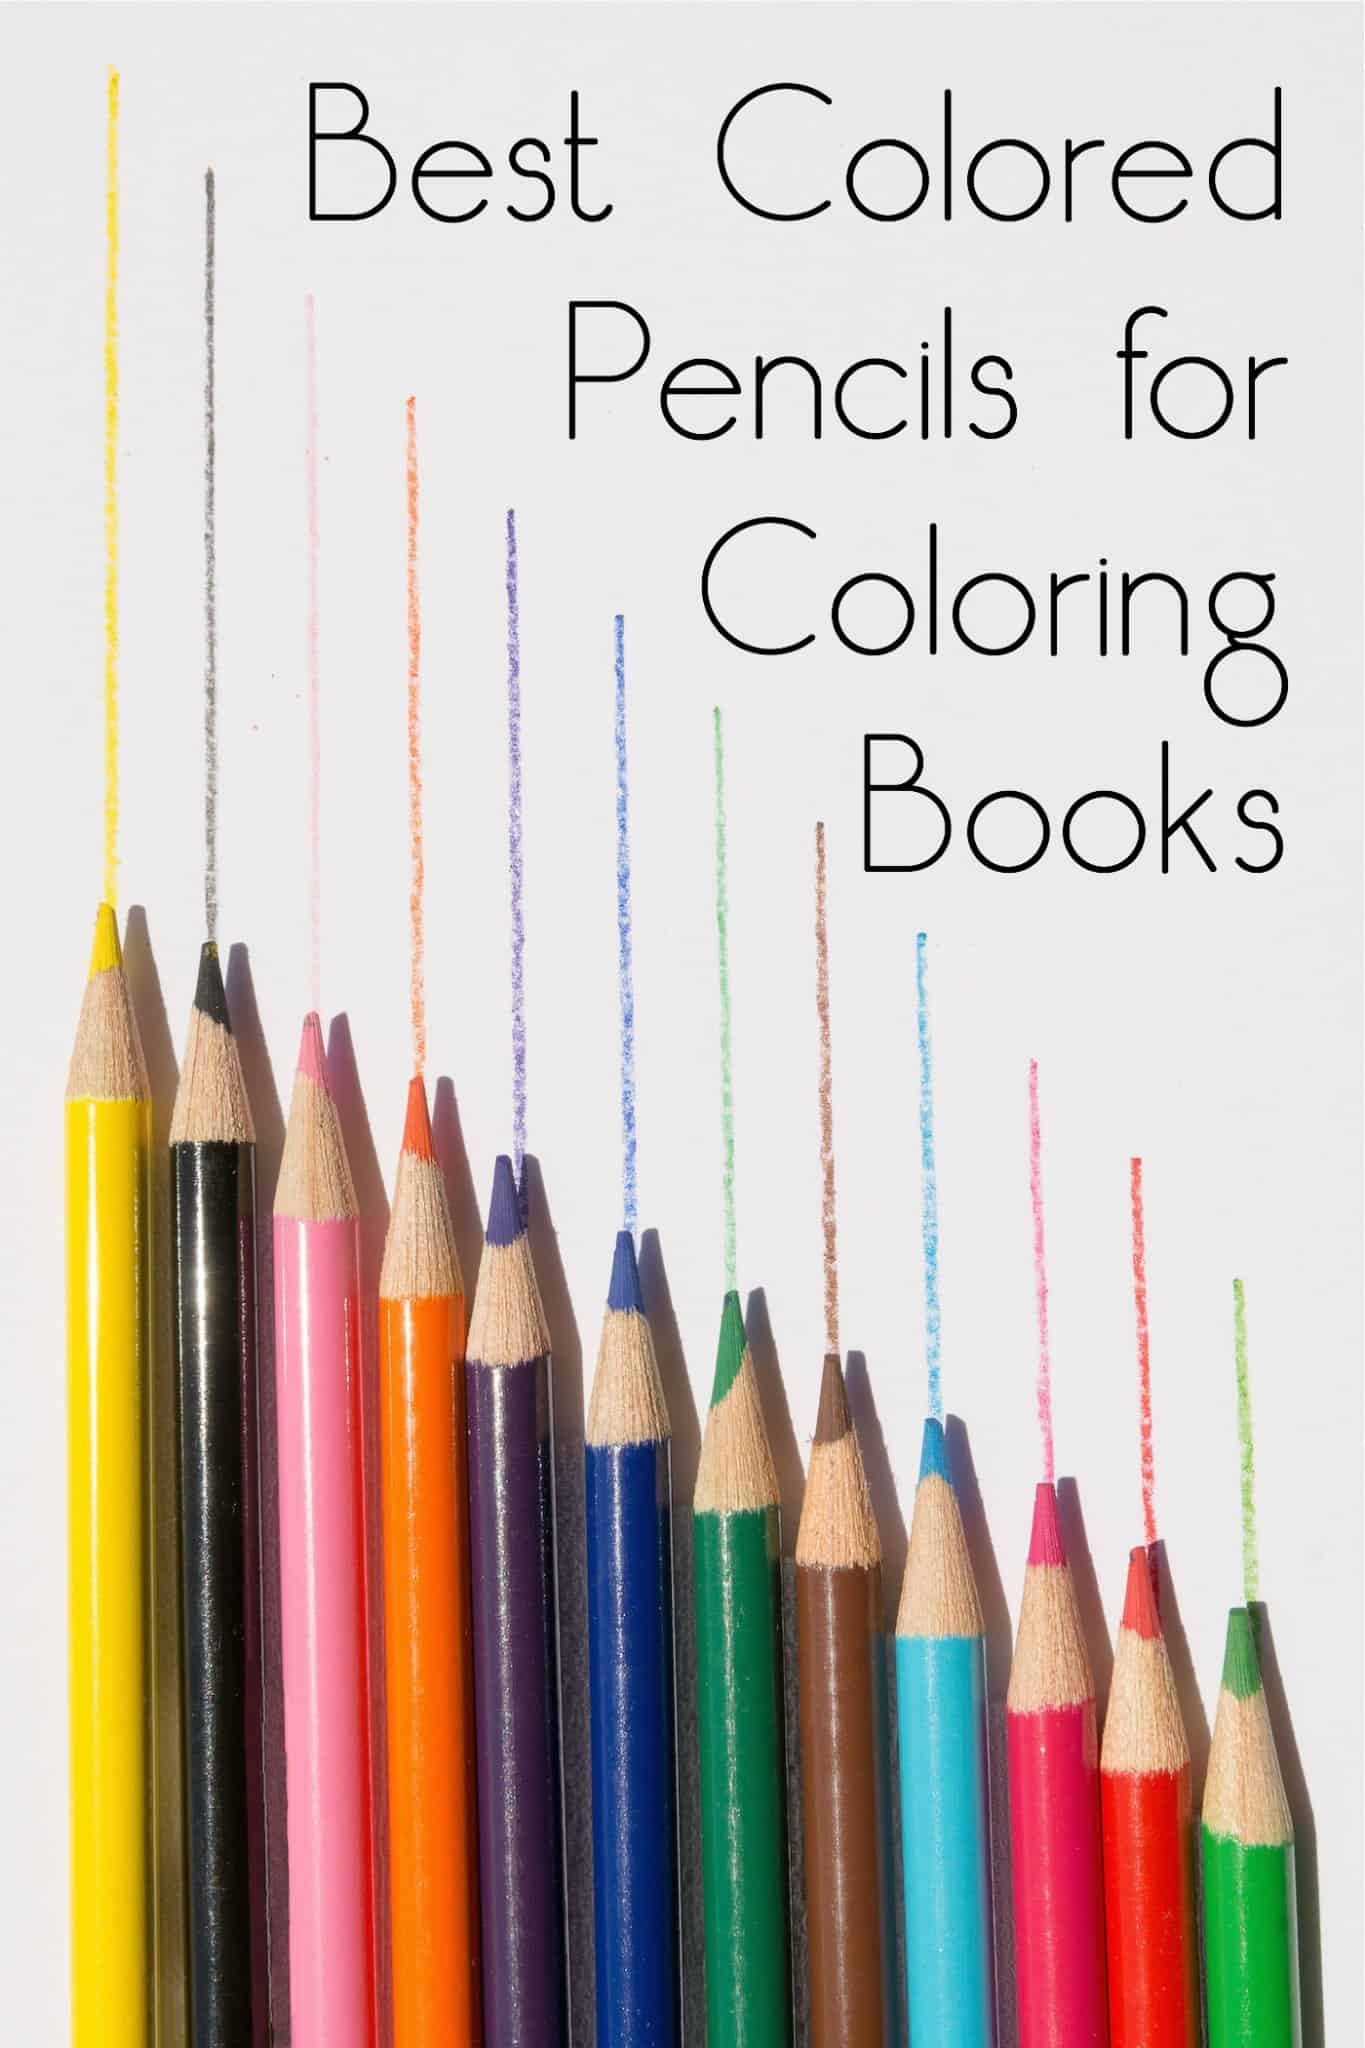 Adult Coloring Book Pencils
 Best Colored Pencils for Coloring Books DIY Candy